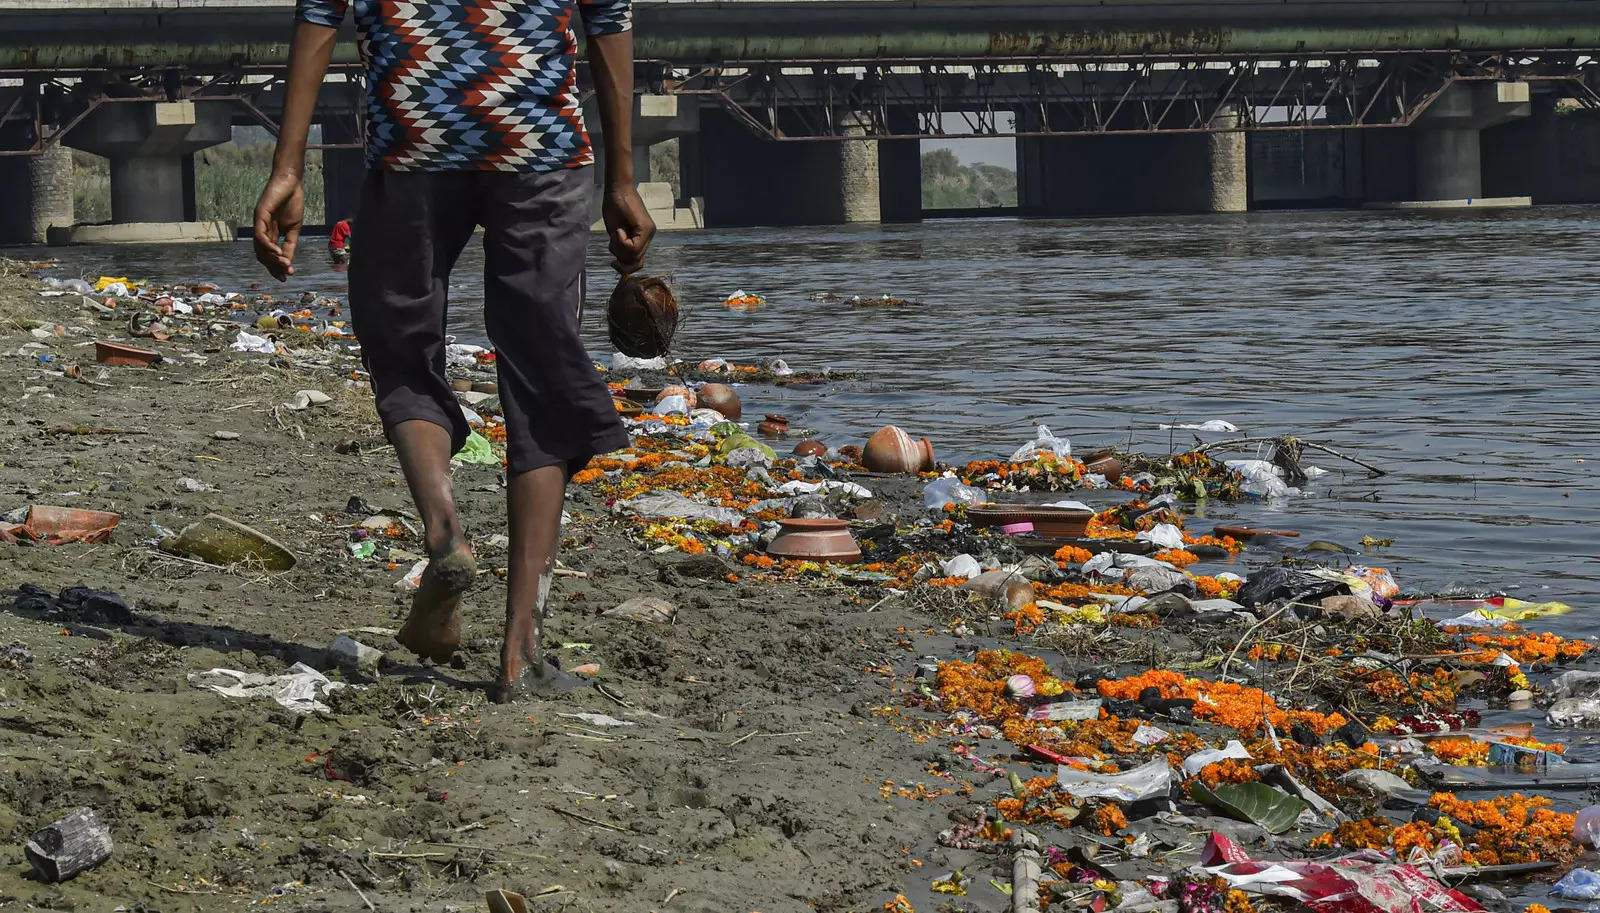 Mumbai's Mithi river woes: Unkept promises lie buried under poll noise 